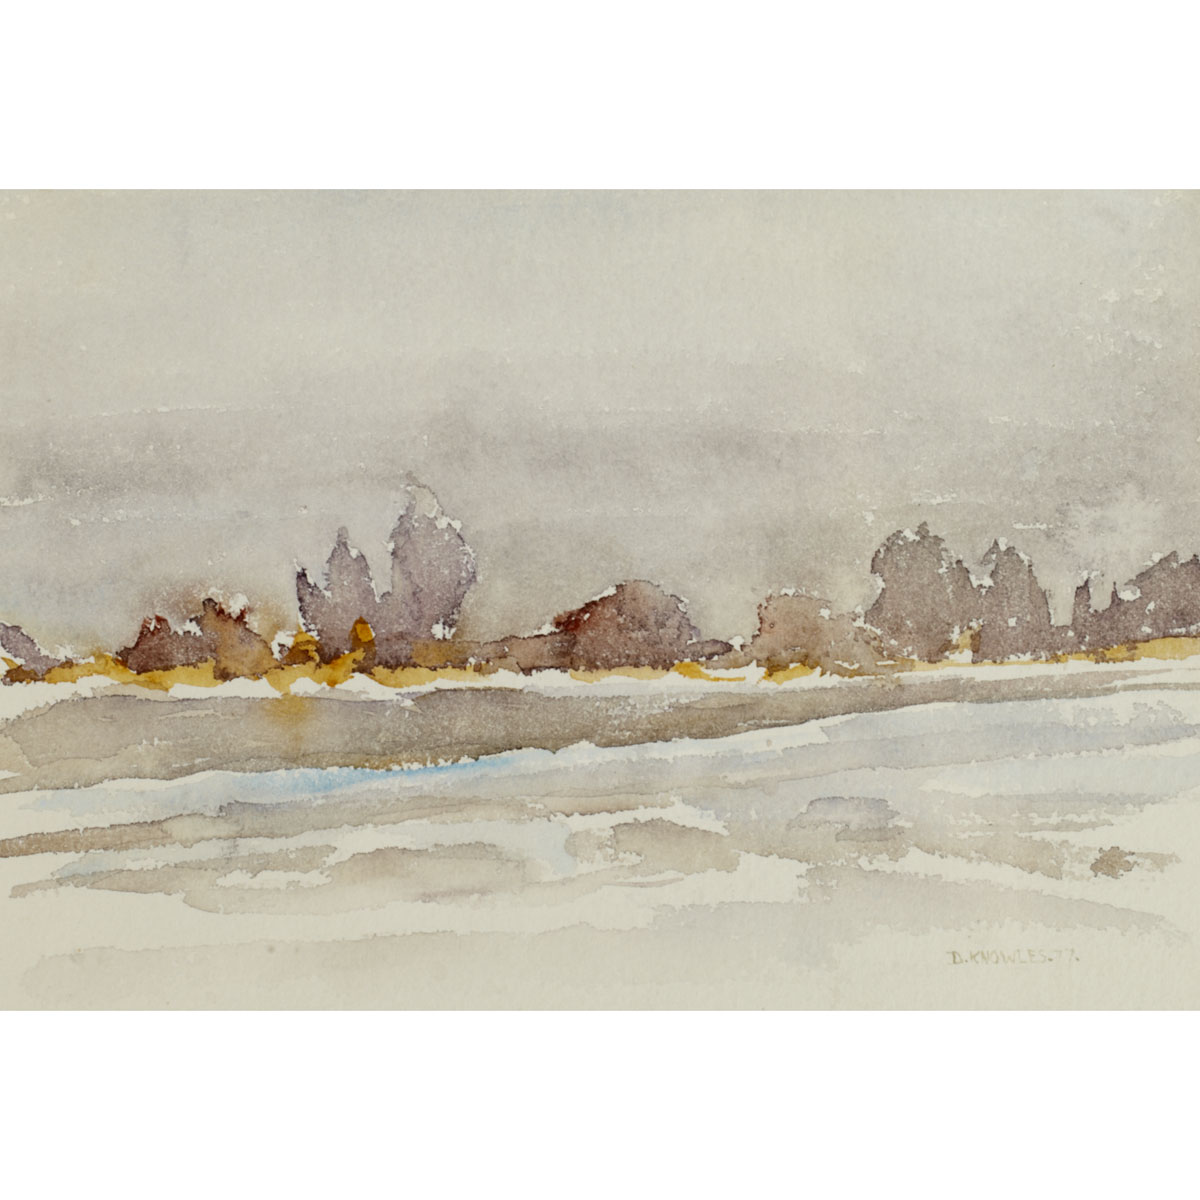 DOROTHY KNOWLES R.C.A. LANDSCAPE